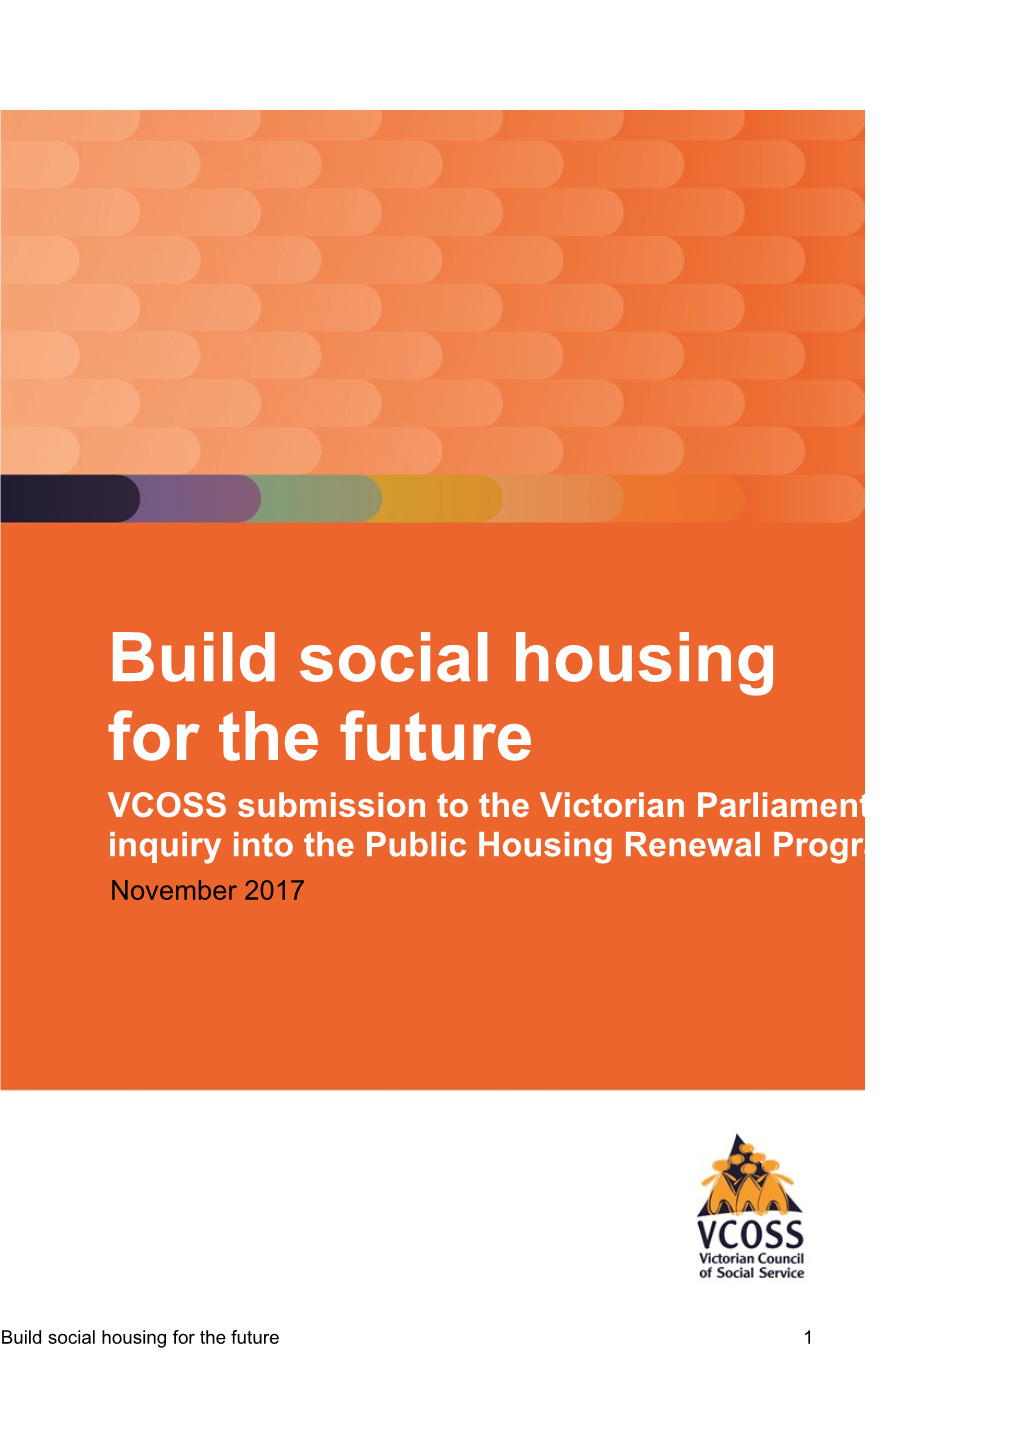 VCOSS Submission to the Victorian Parliamentary Inquiry Into the Public Housing Renewal